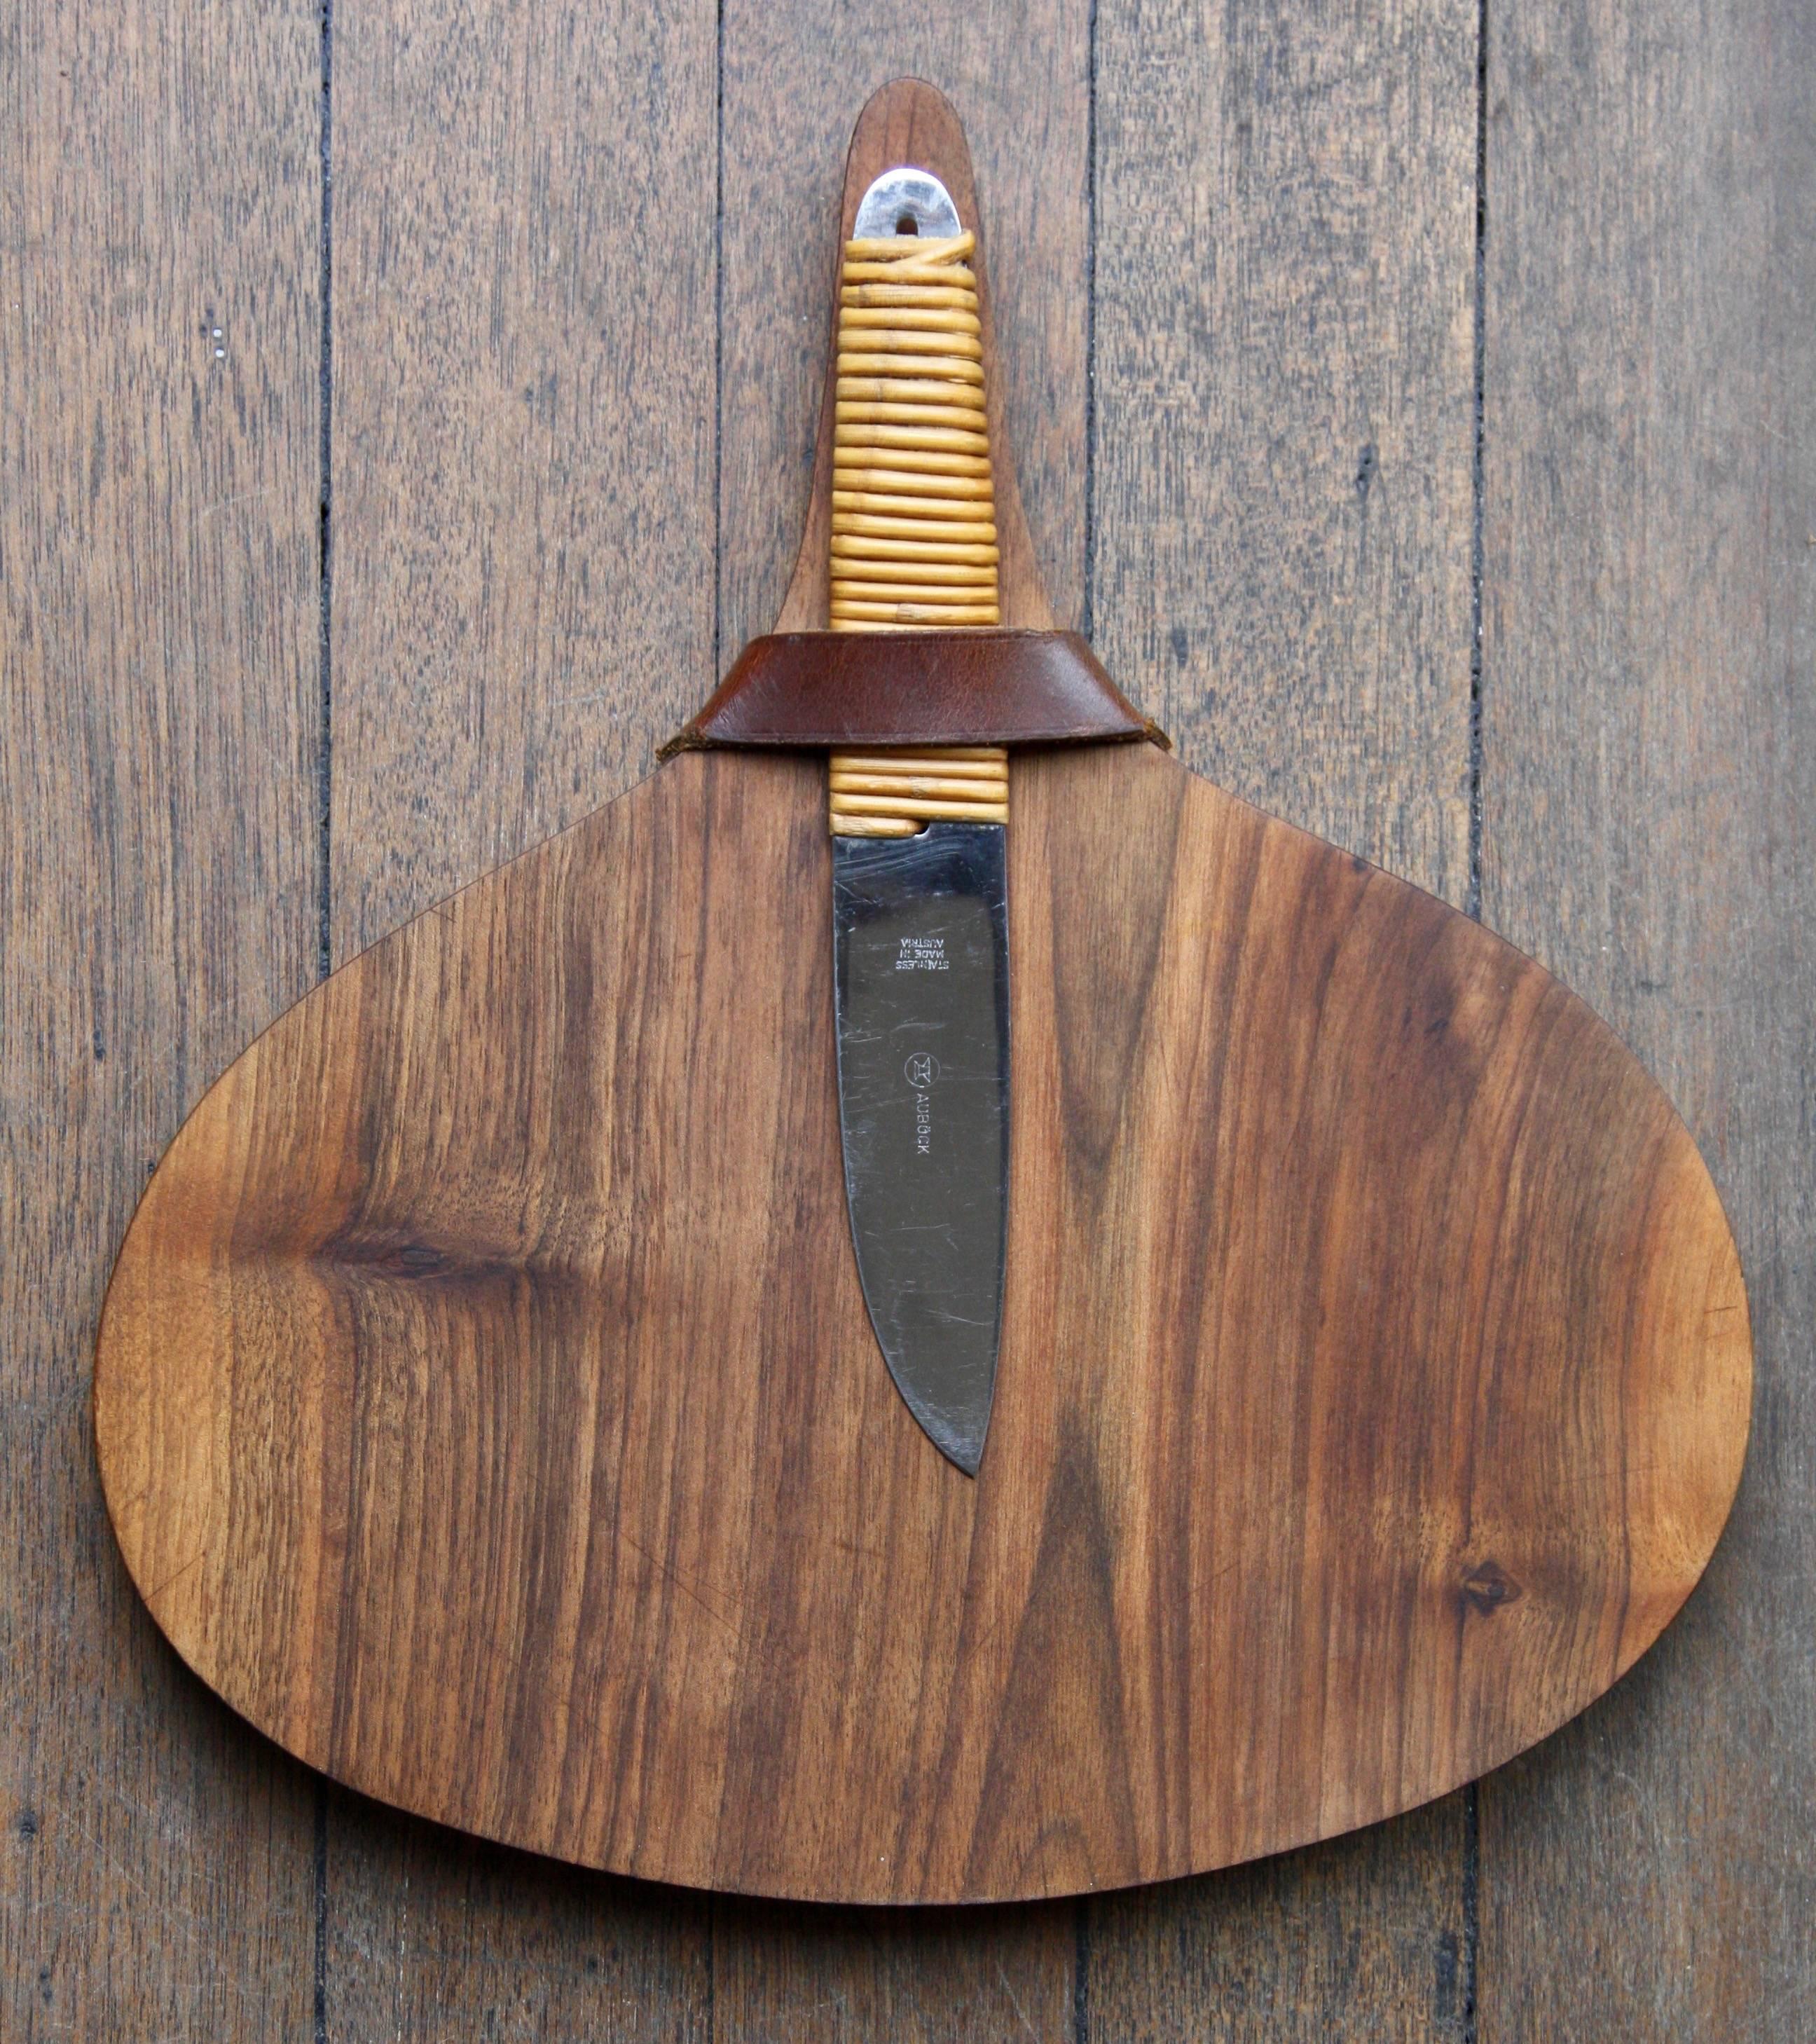 A vintage cutting and serving board with knife designed and made by Carl Auböck II, Vienna, circa 1950.
The board is sculptured from solid walnut and features a handle so that items may be presented on the platter. A dark tan brown leather strap